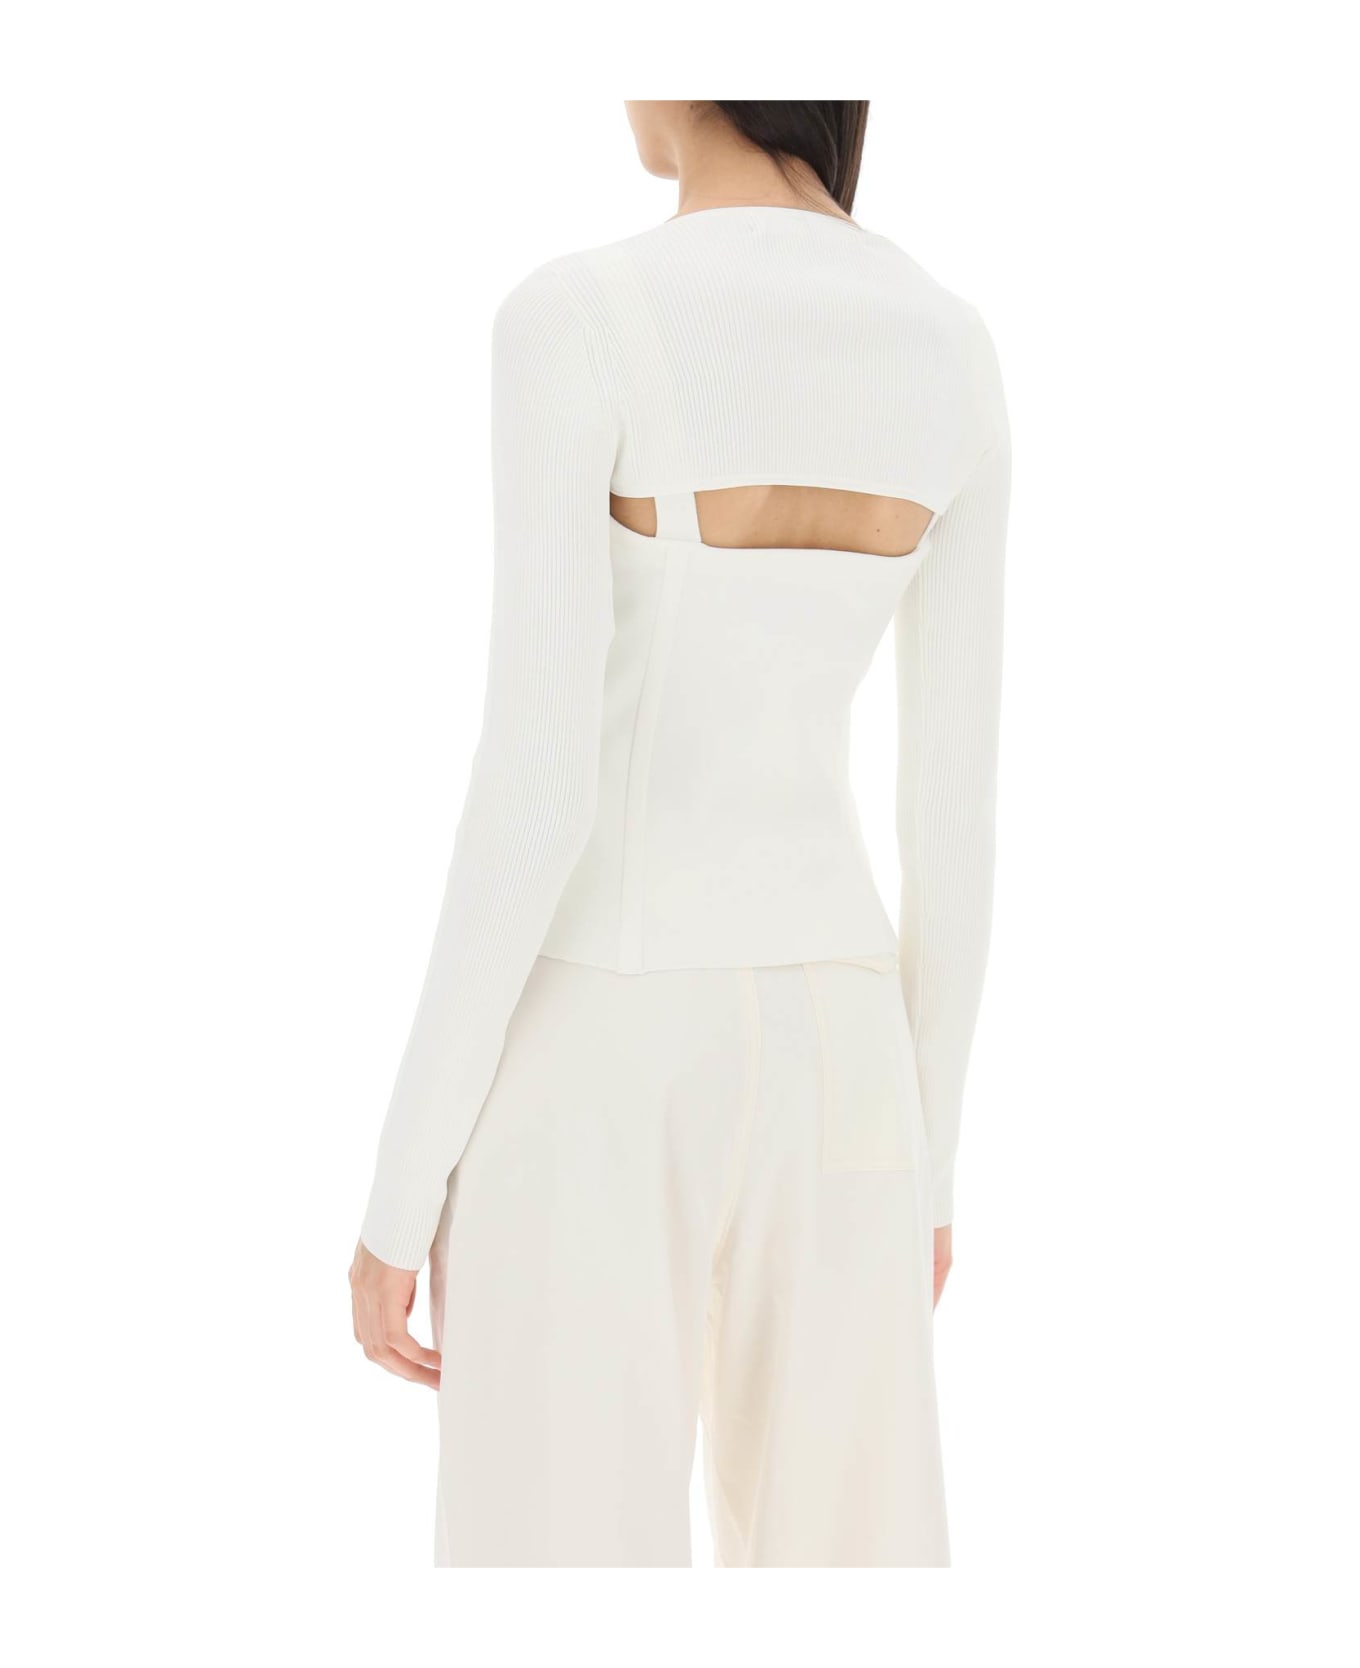 Dion Lee Modular Corset Top - IVORY (White) トップス